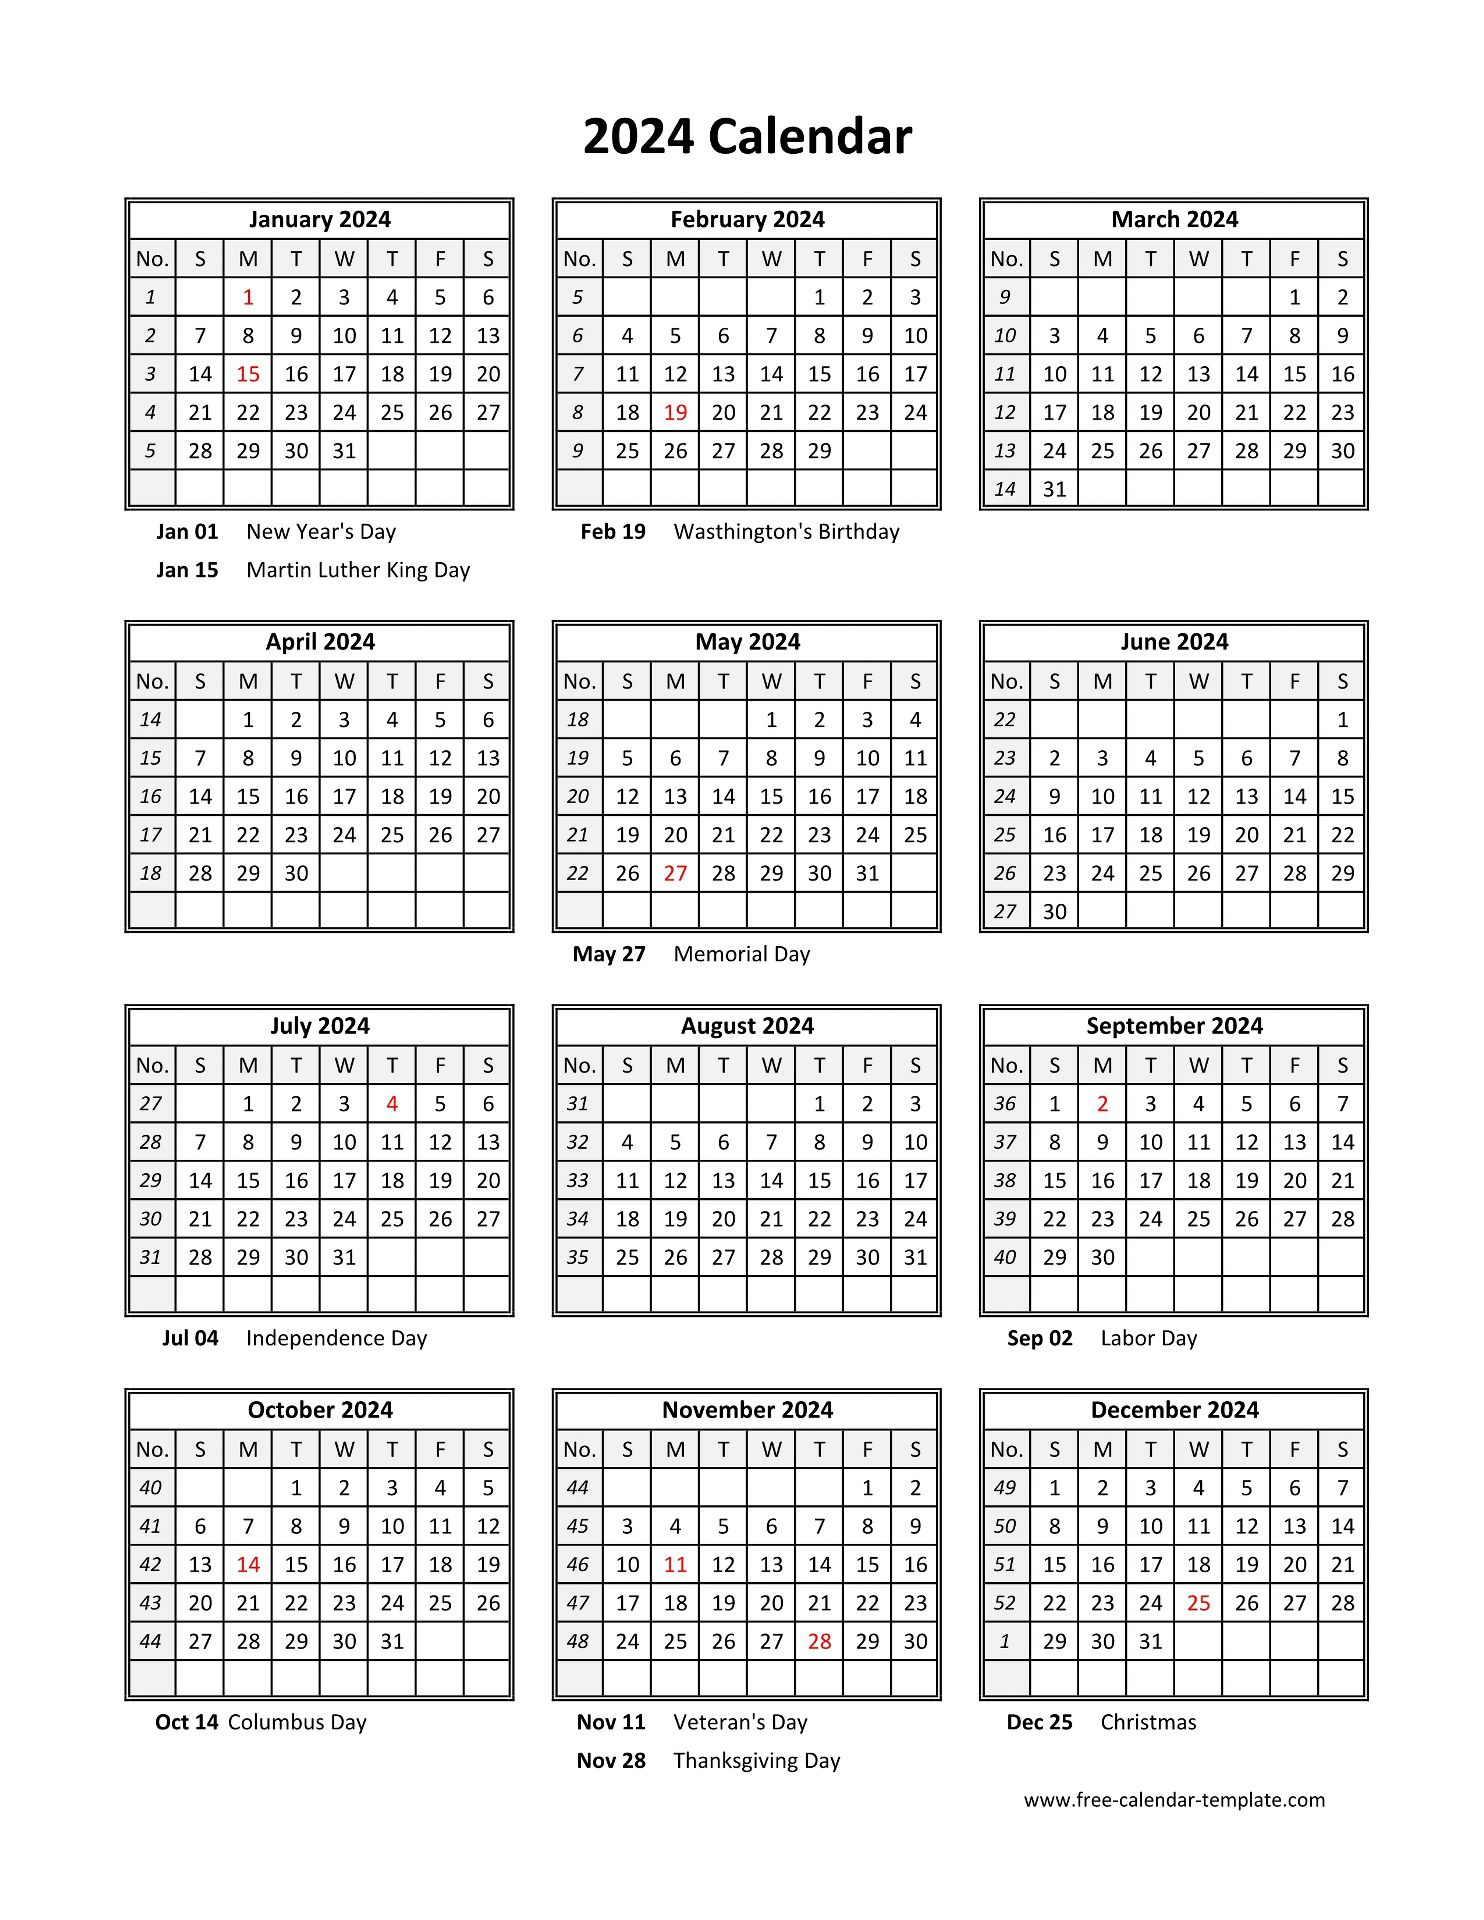 Yearly Printable Calendar 2024 With Holidays | Free-Calendar | Free Printable 2024 Calendar Year